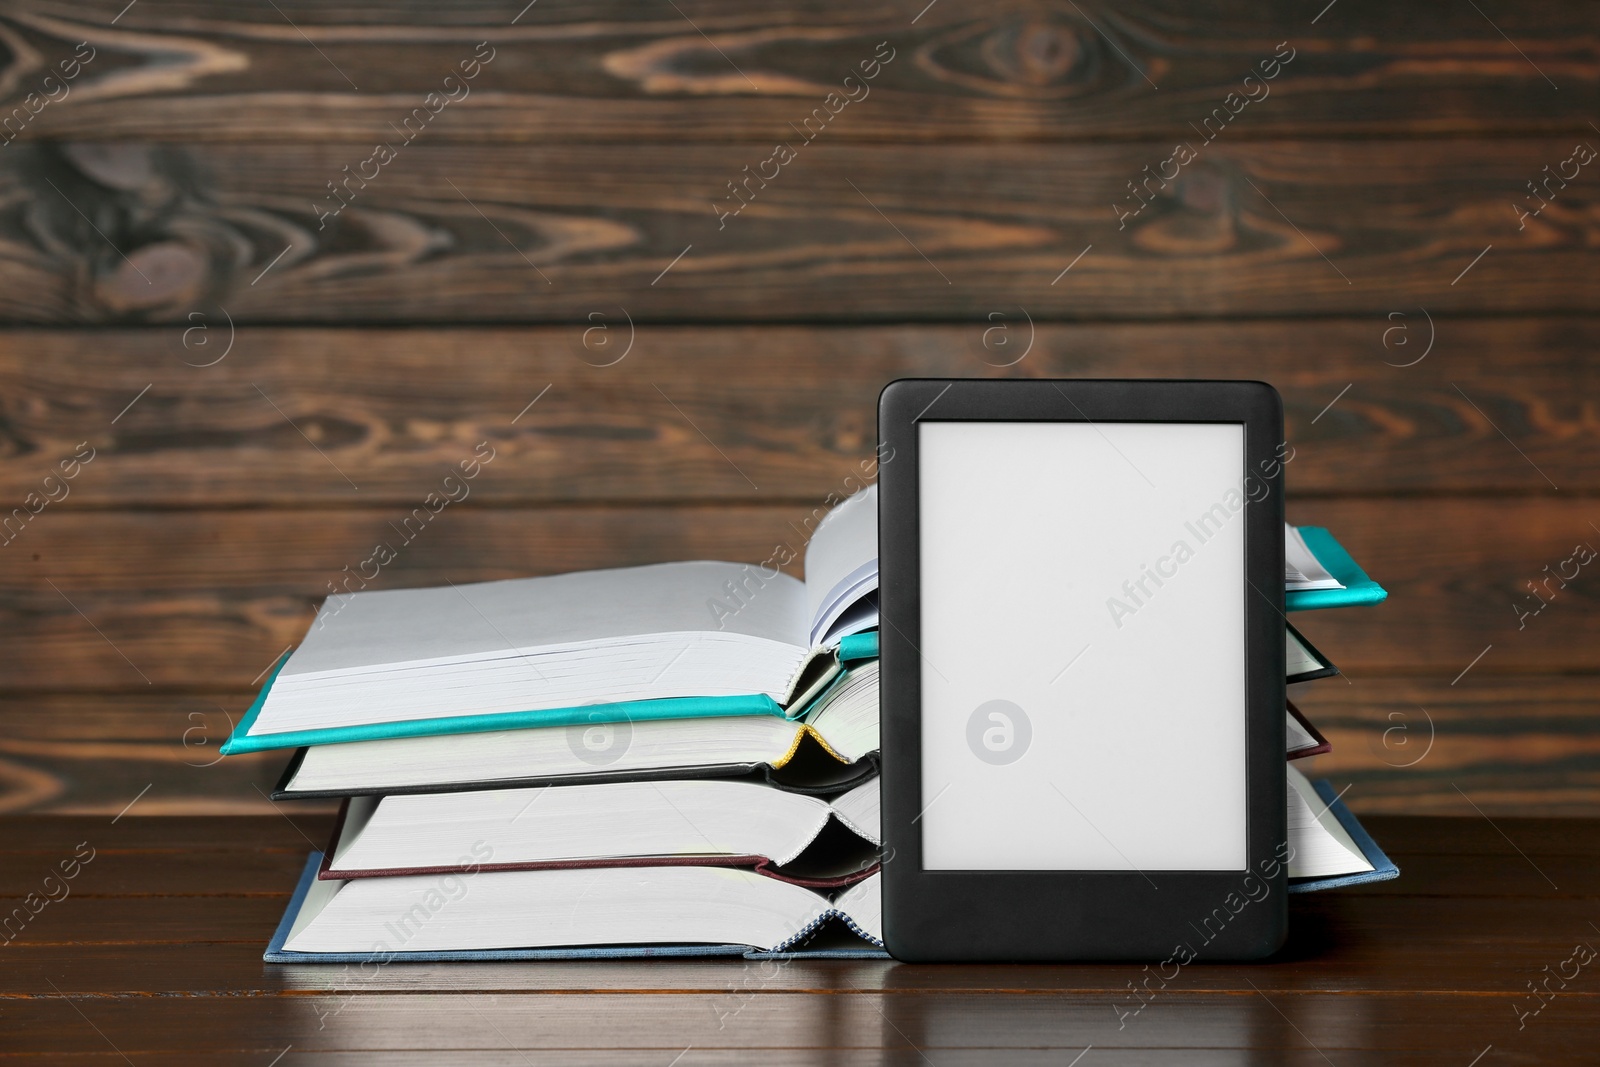 Photo of Portable e-book reader and many hardcover books on wooden table